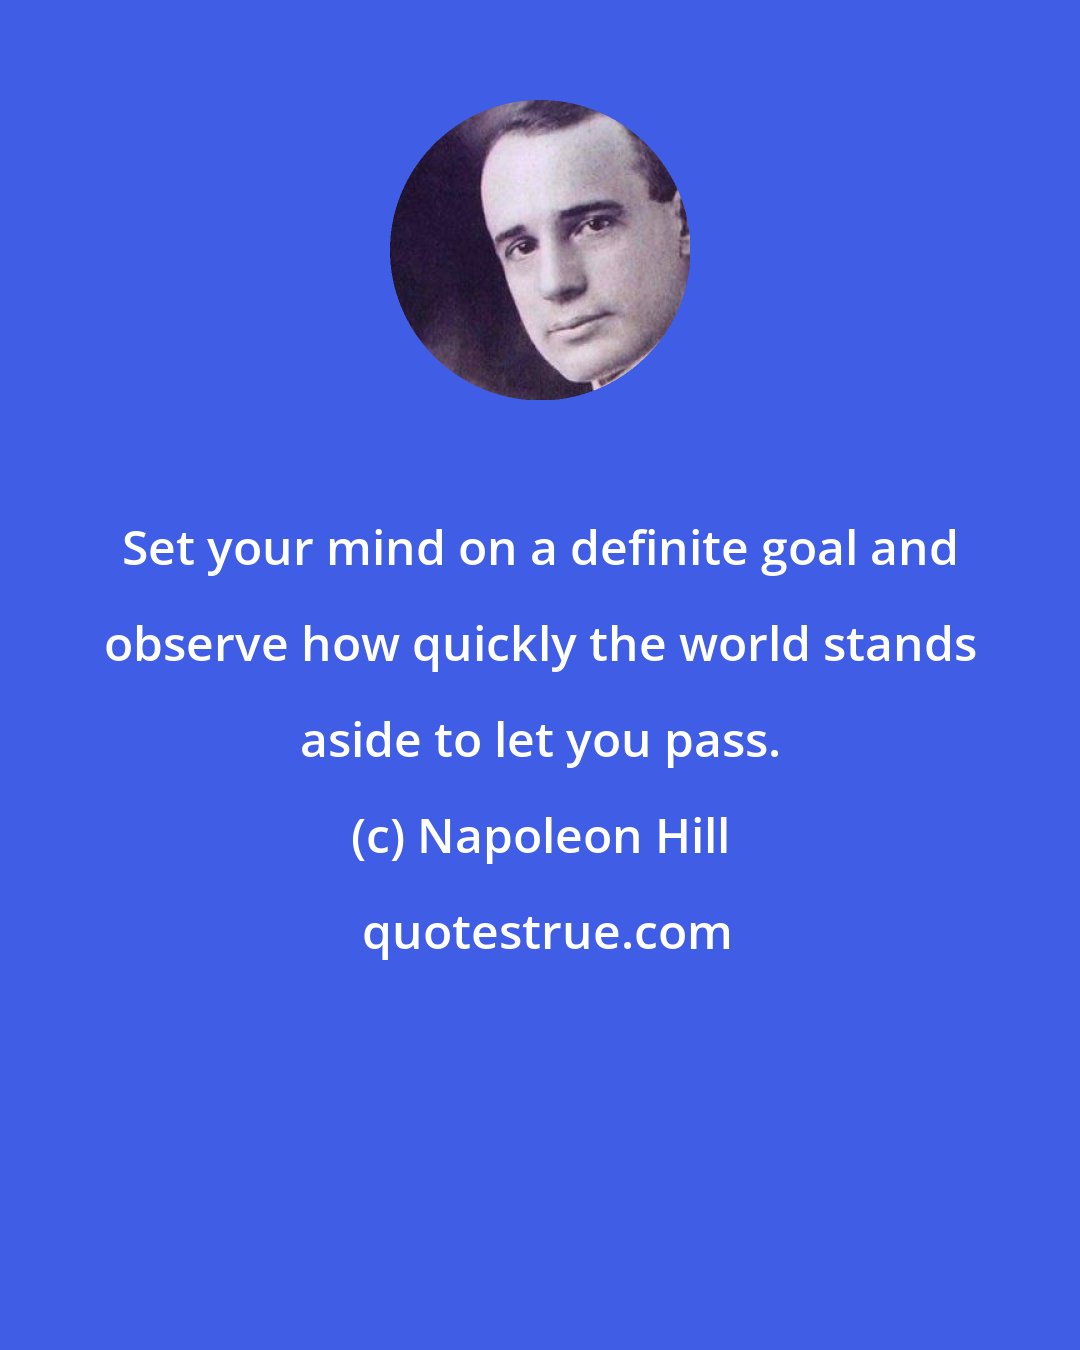 Napoleon Hill: Set your mind on a definite goal and observe how quickly the world stands aside to let you pass.